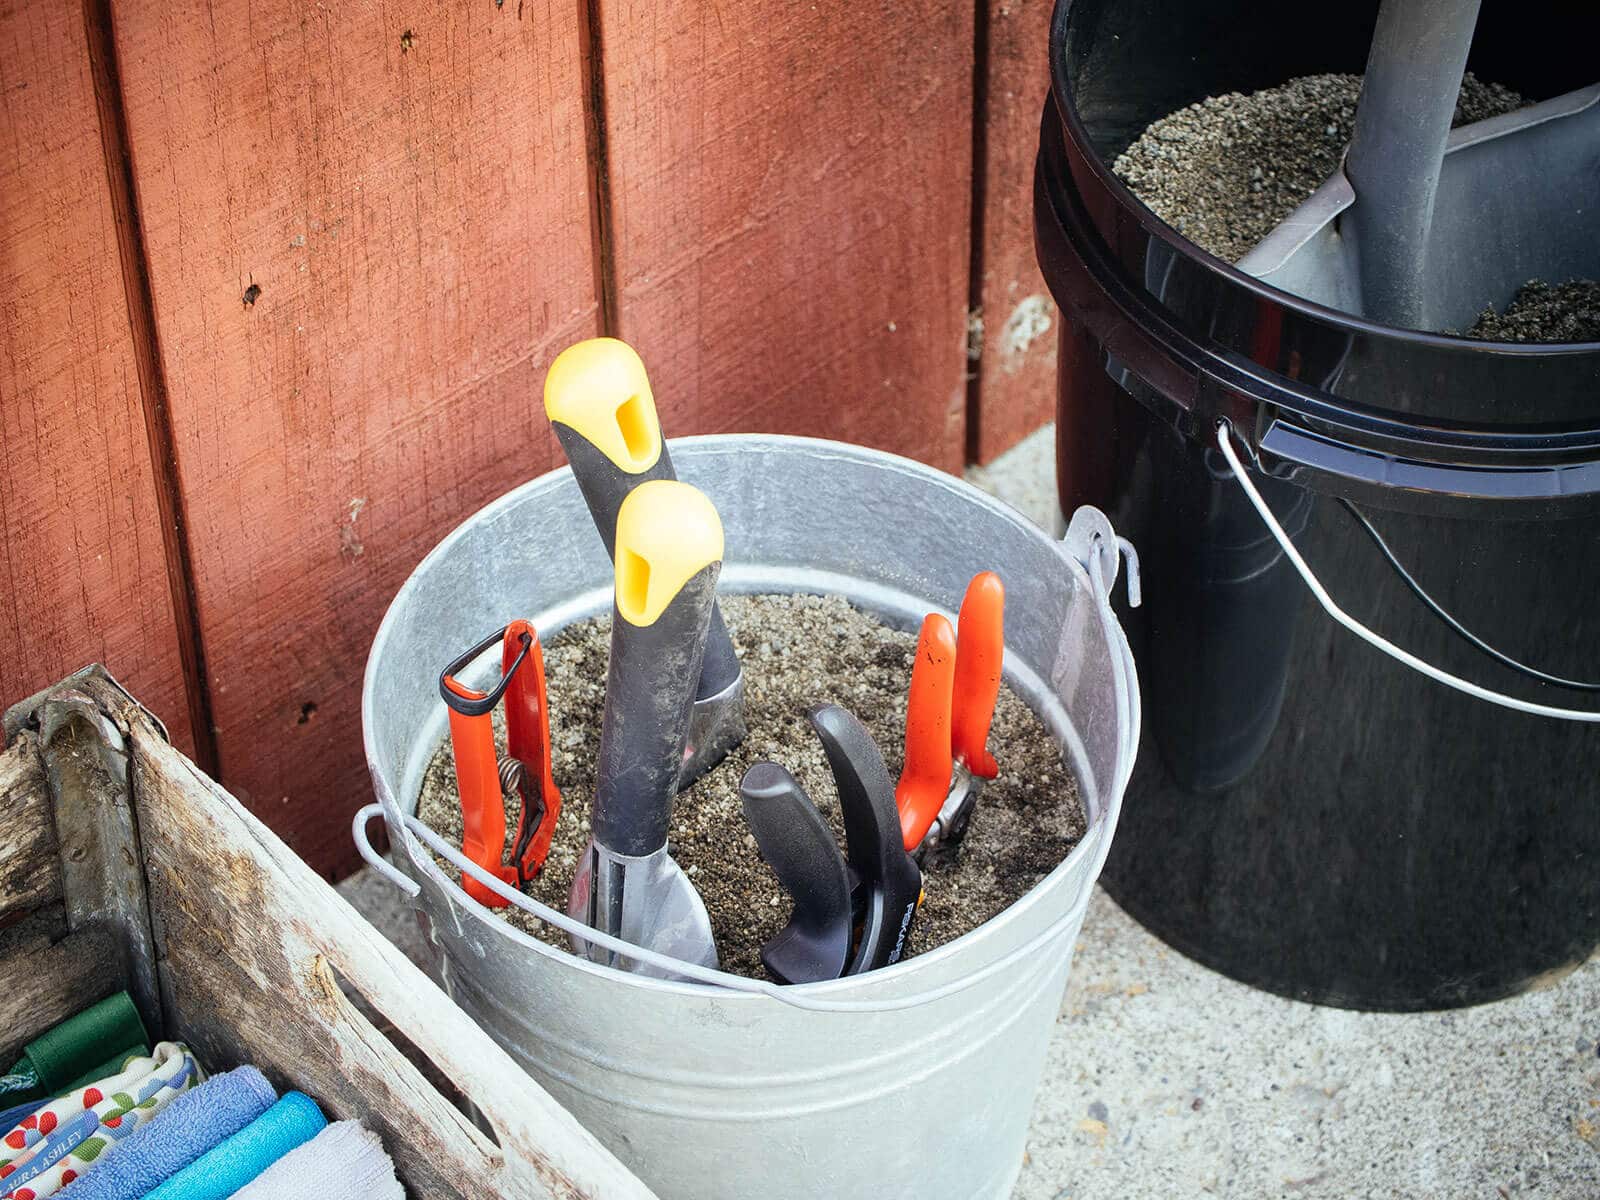 Small garden tools and shovel stored in "quick clean" buckets filled with oily sand